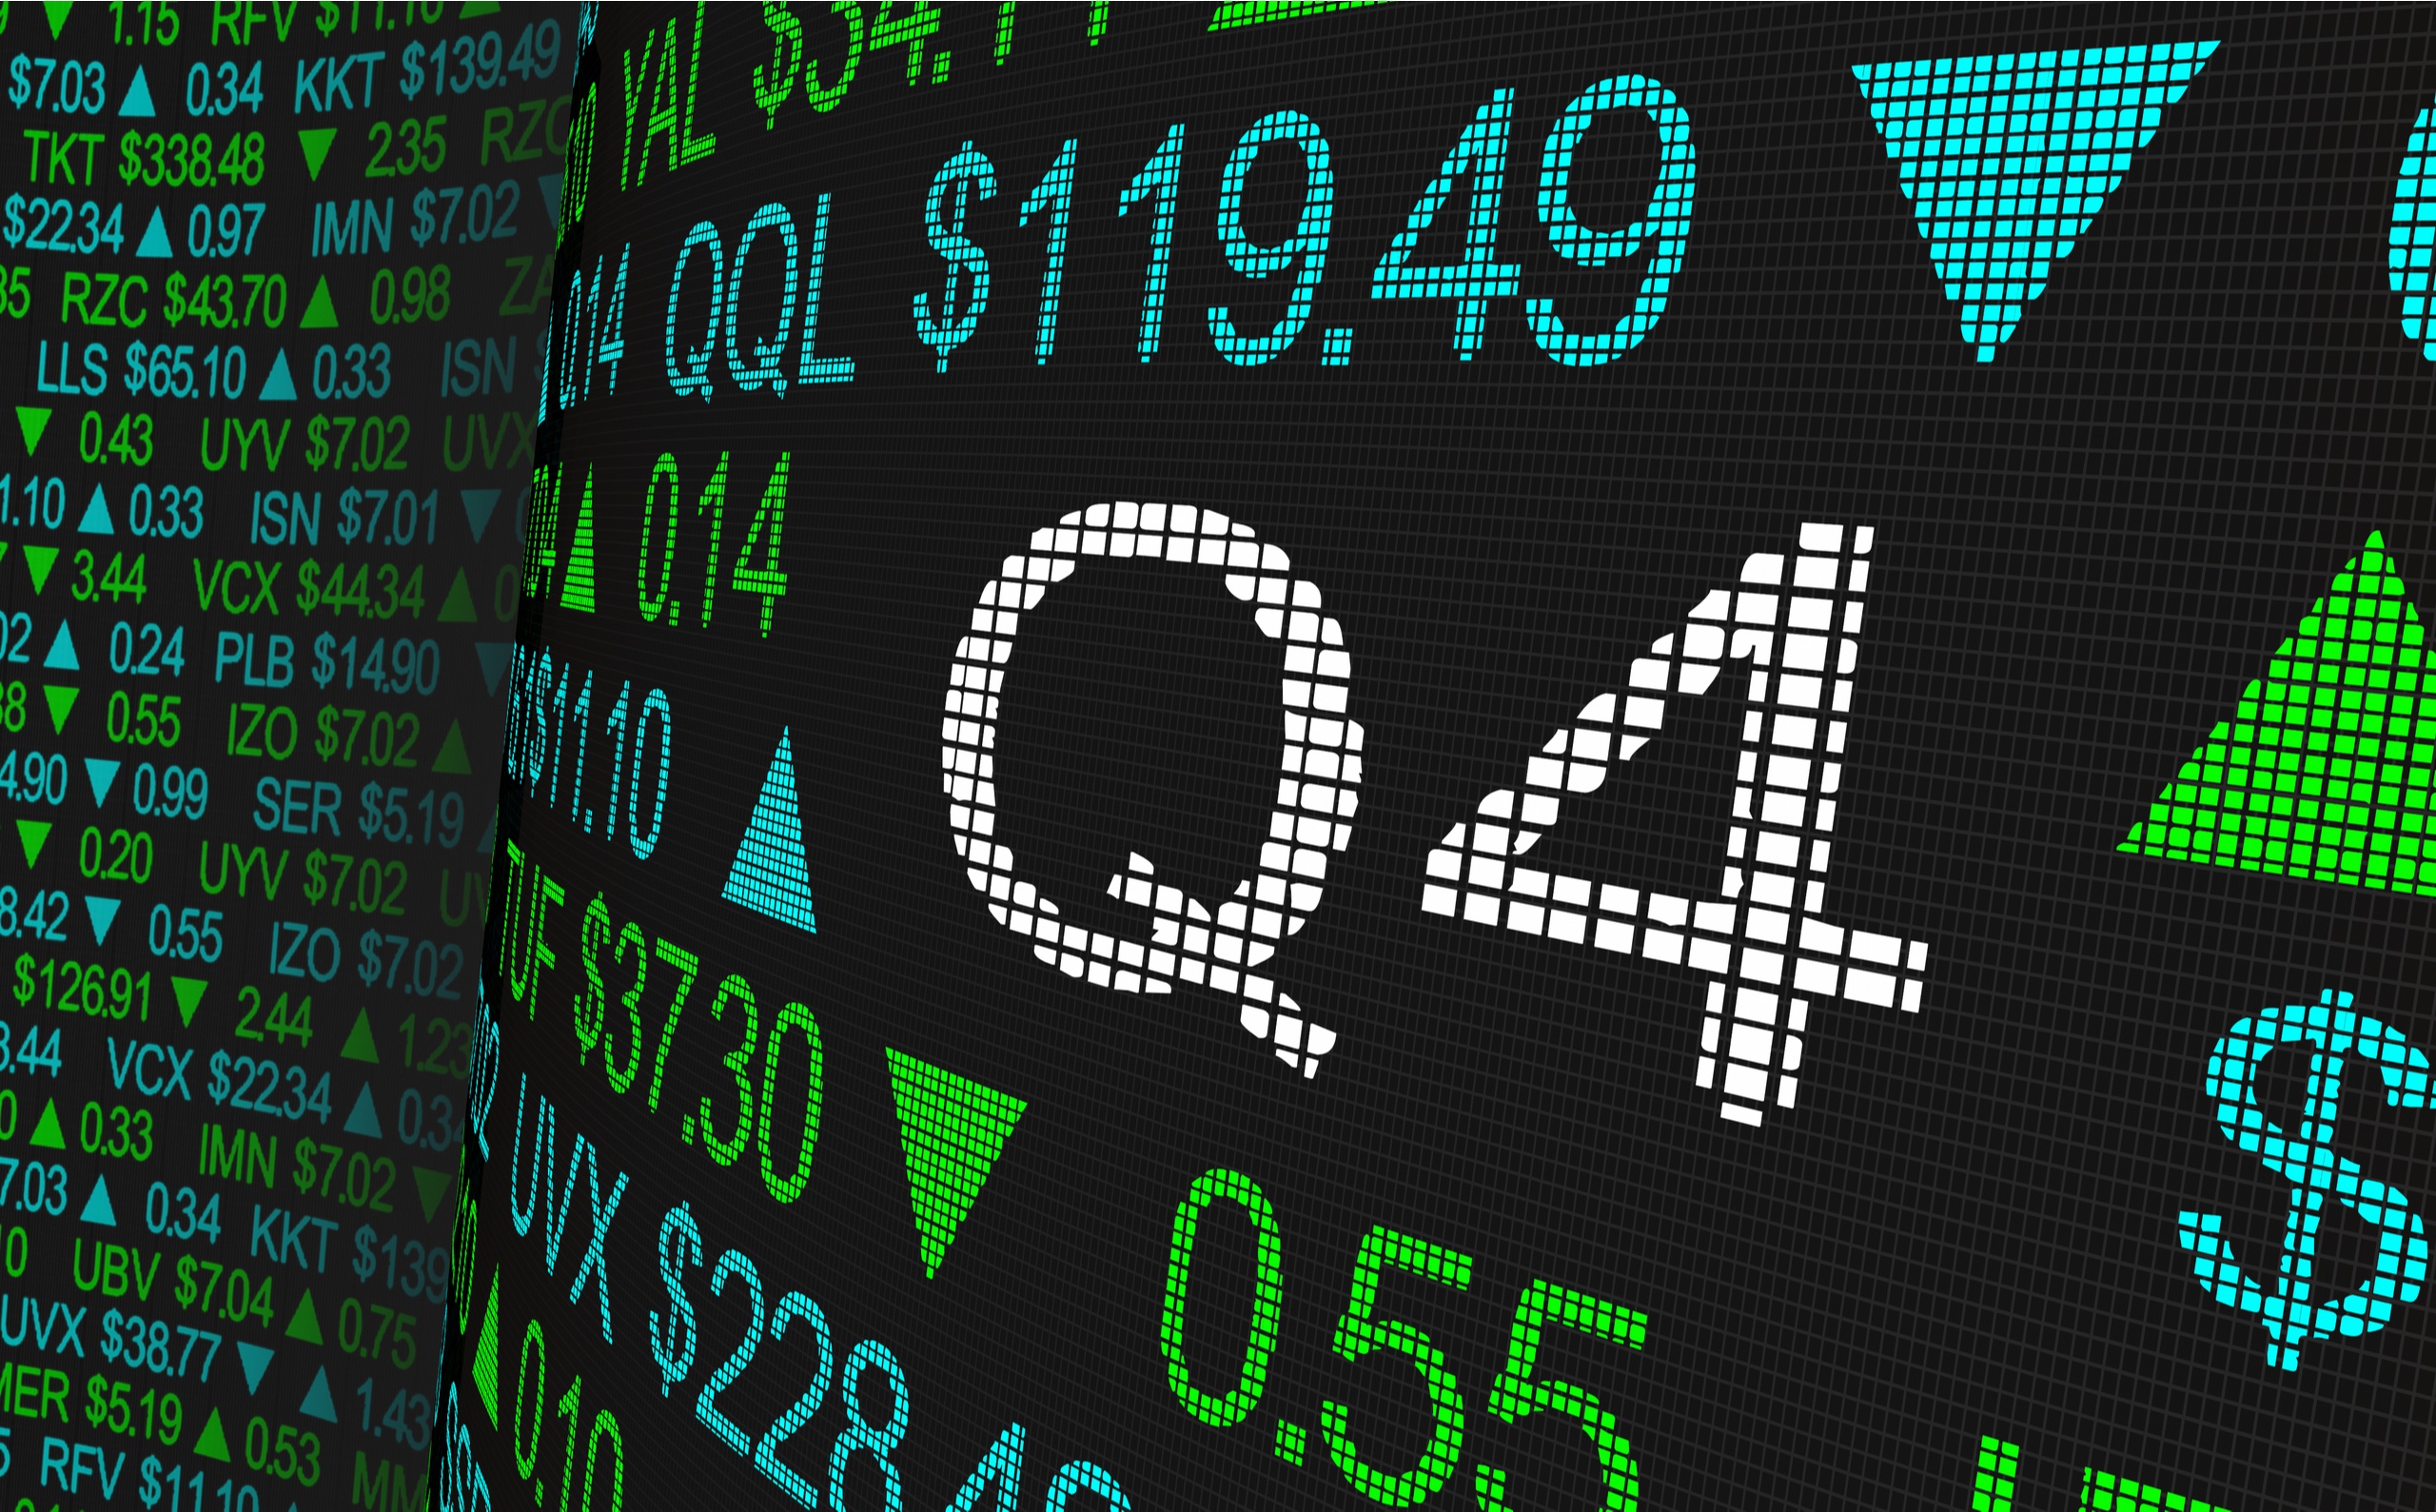 The letters “q4” on a stock market screen